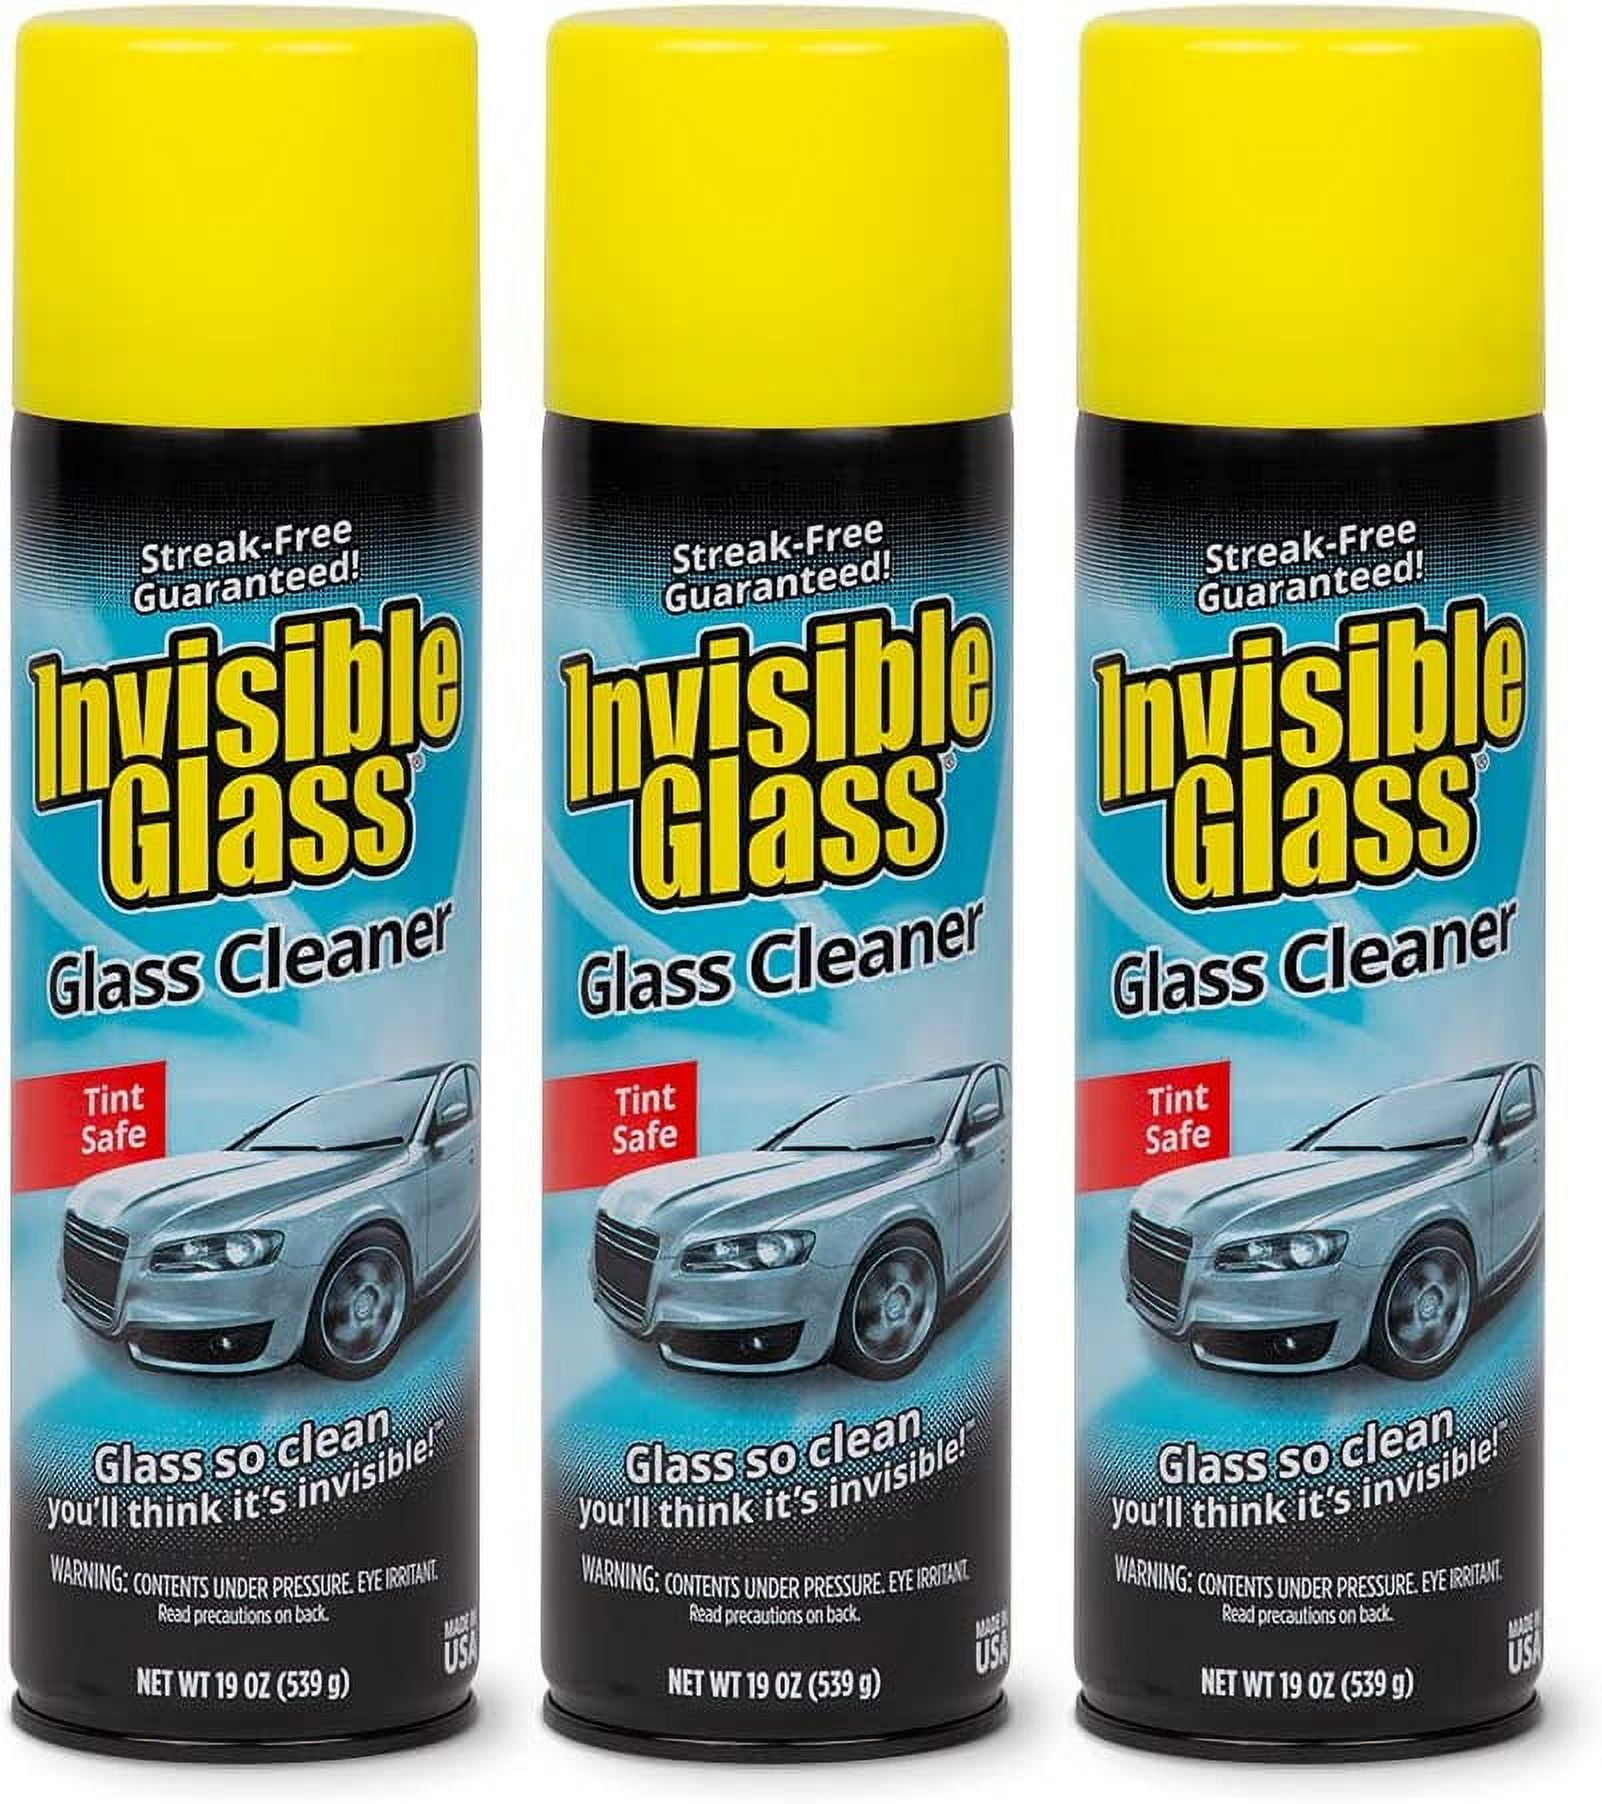 JT's Ceramic Glass Cleaner - Car Window Cleaner | Car Wash All-Natural Streak Free Formula for Car Cleaning | Safe on Tinted & Non-Tinted Glass | Wont